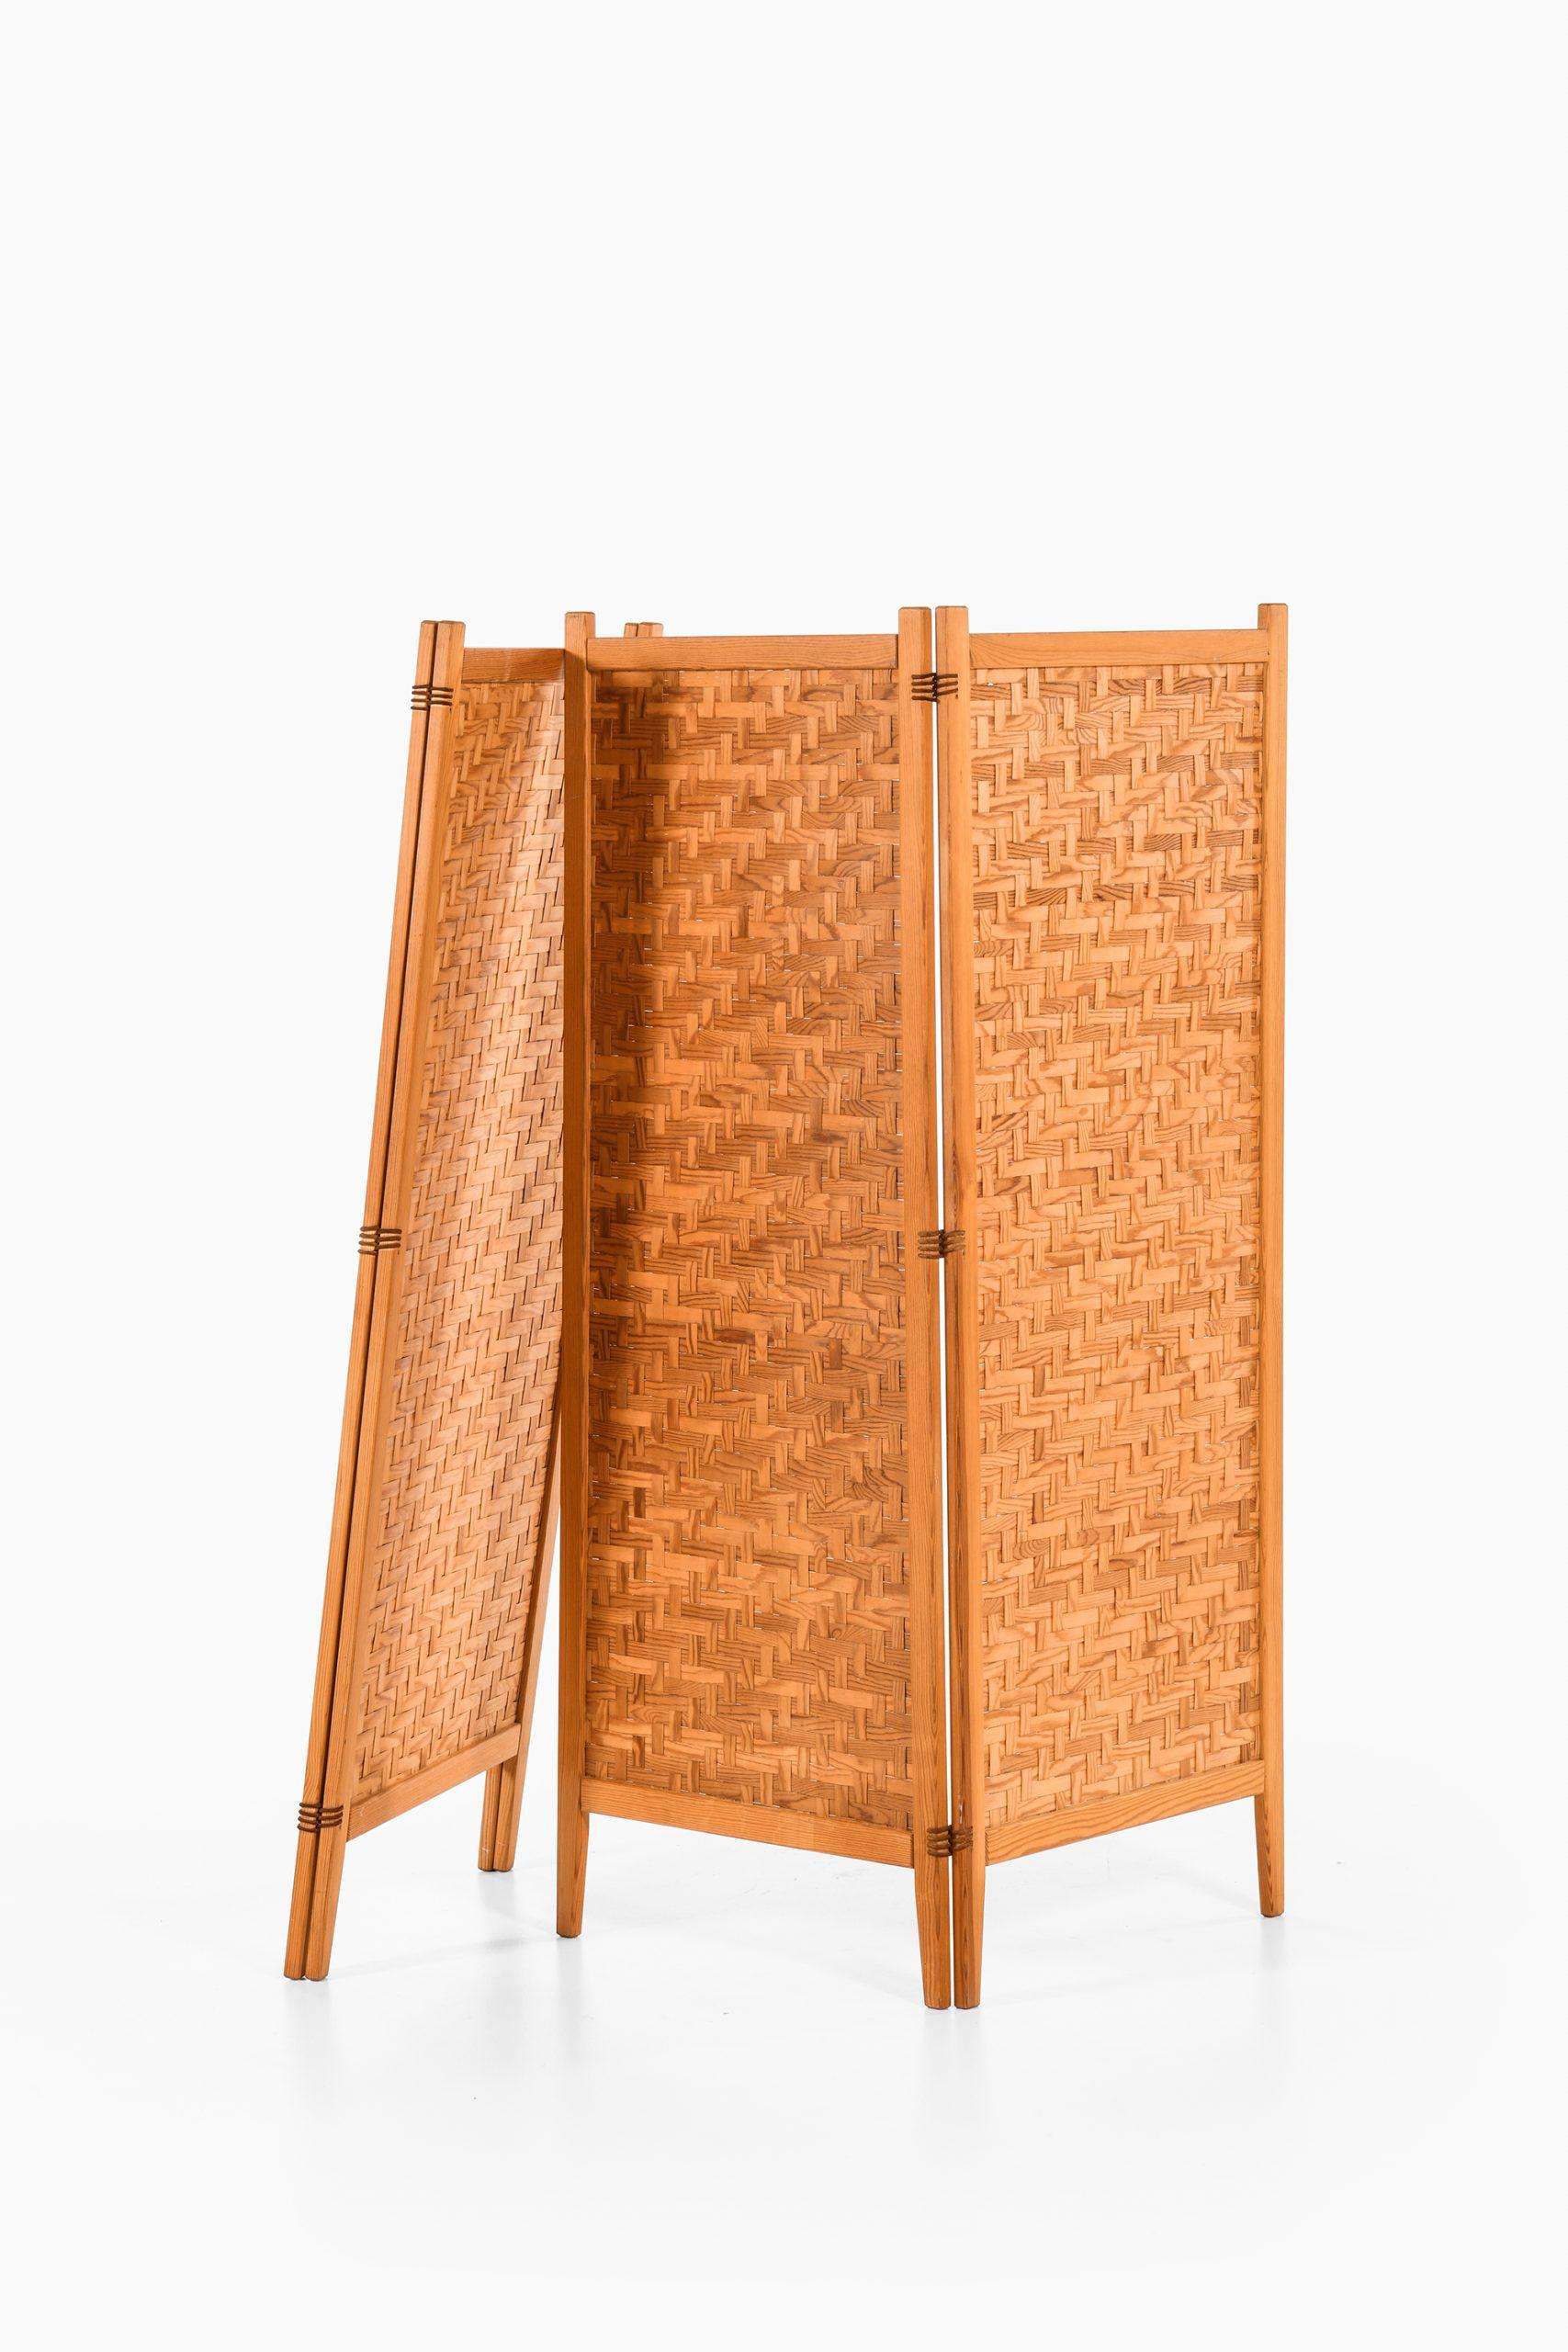 Folding Screens / Room Dividers Produced by Alberts in Tibro, Sweden In Good Condition For Sale In Limhamn, Skåne län